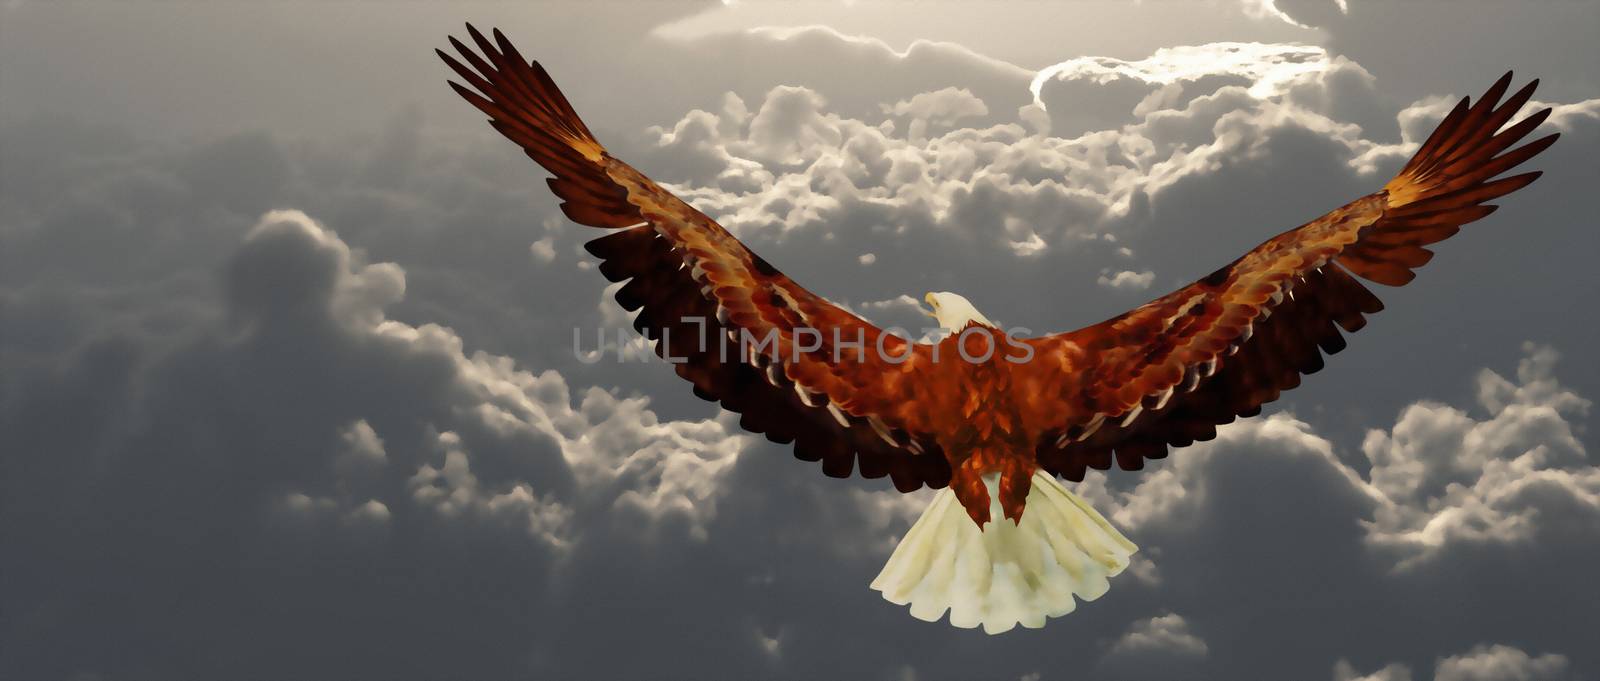 Eagle by applesstock